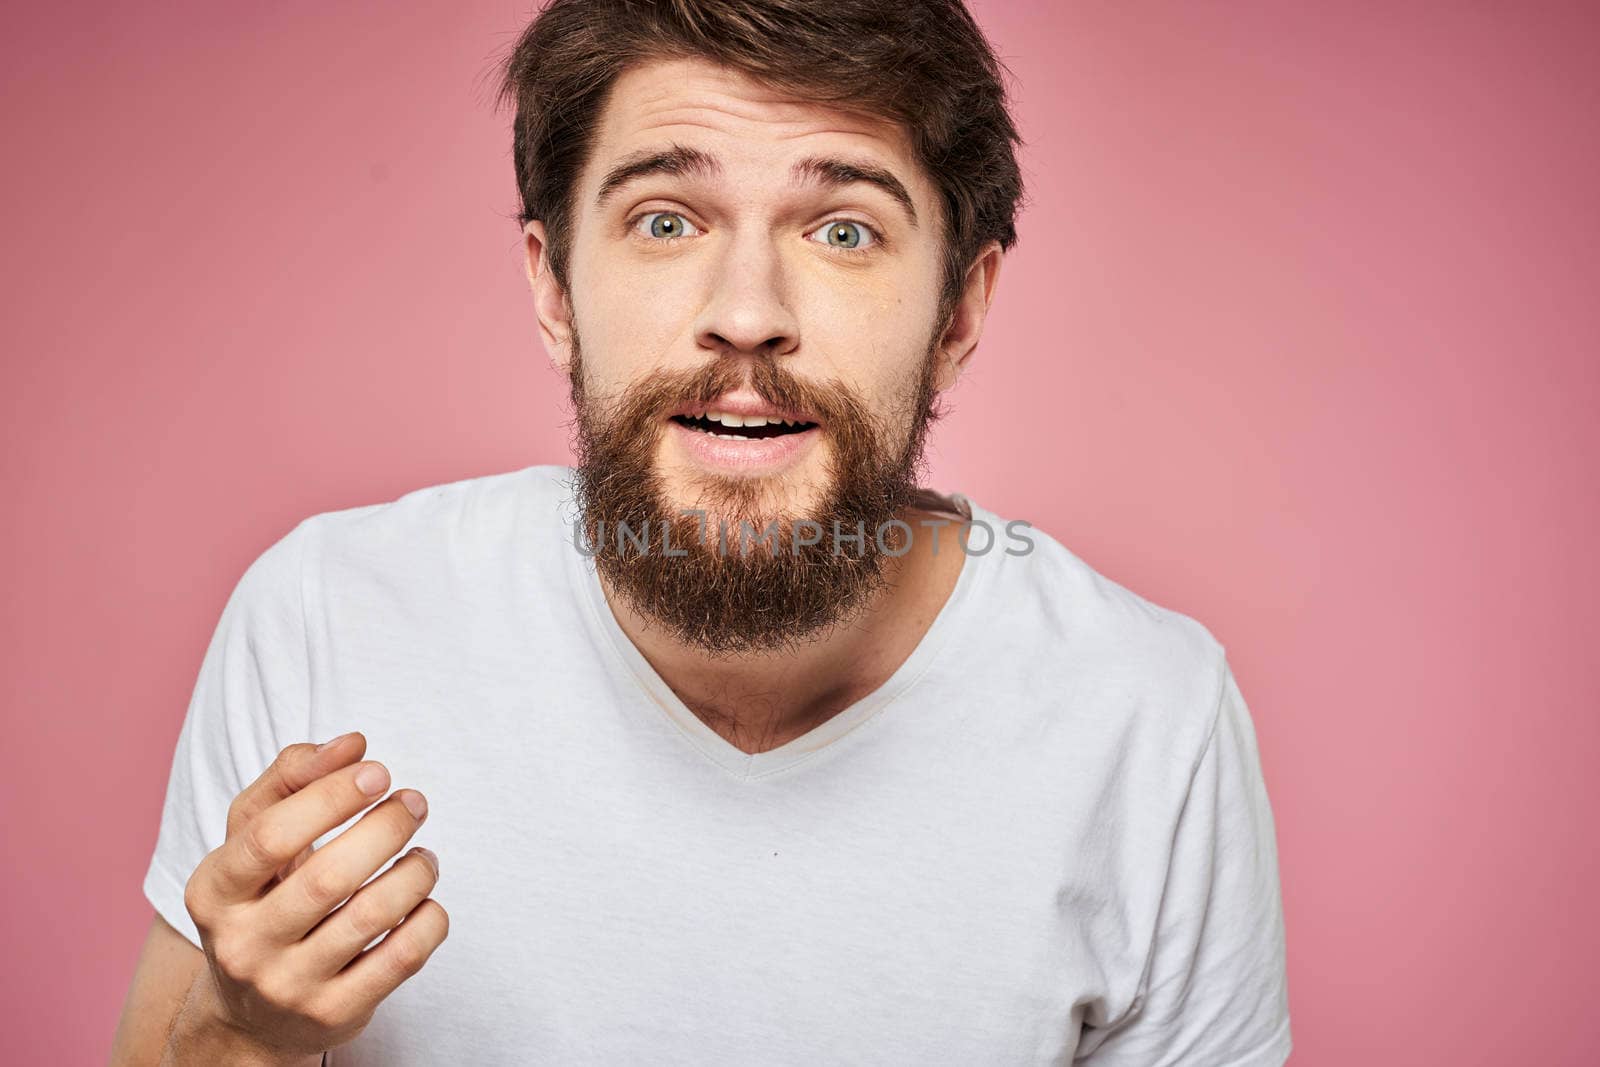 Man in white t-shirt emotions lifestyle facial expression cropped view pink background. High quality photo